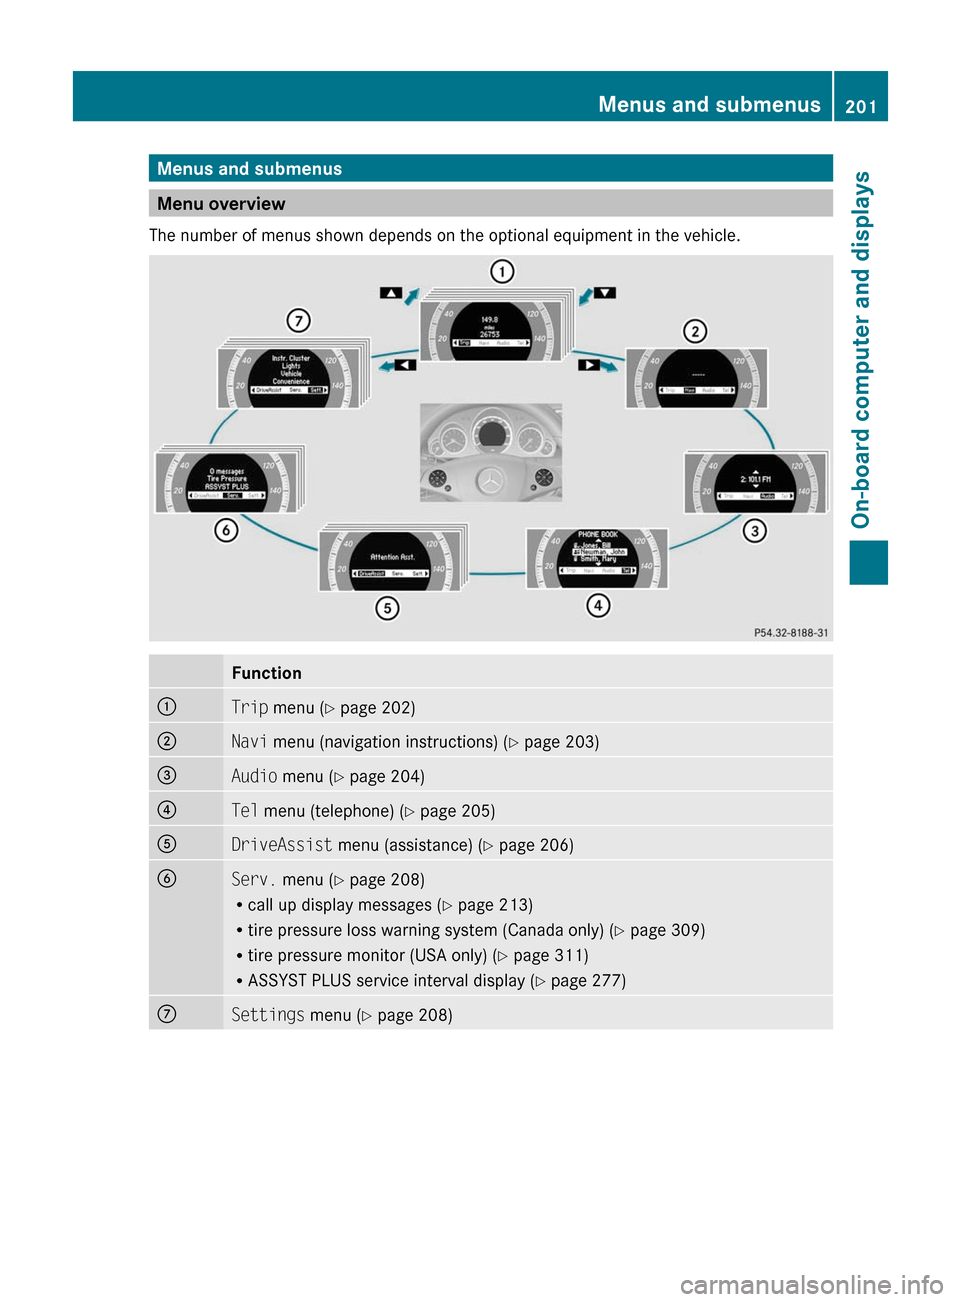 MERCEDES-BENZ E-Class COUPE 2011 C207 Owners Manual Menus and submenus
Menu overview
The number of menus shown depends on the optional equipment in the vehicle. 
Function:Trip  menu ( Y page 202);Navi  menu (navigation instructions) ( Y page 203)=Audio